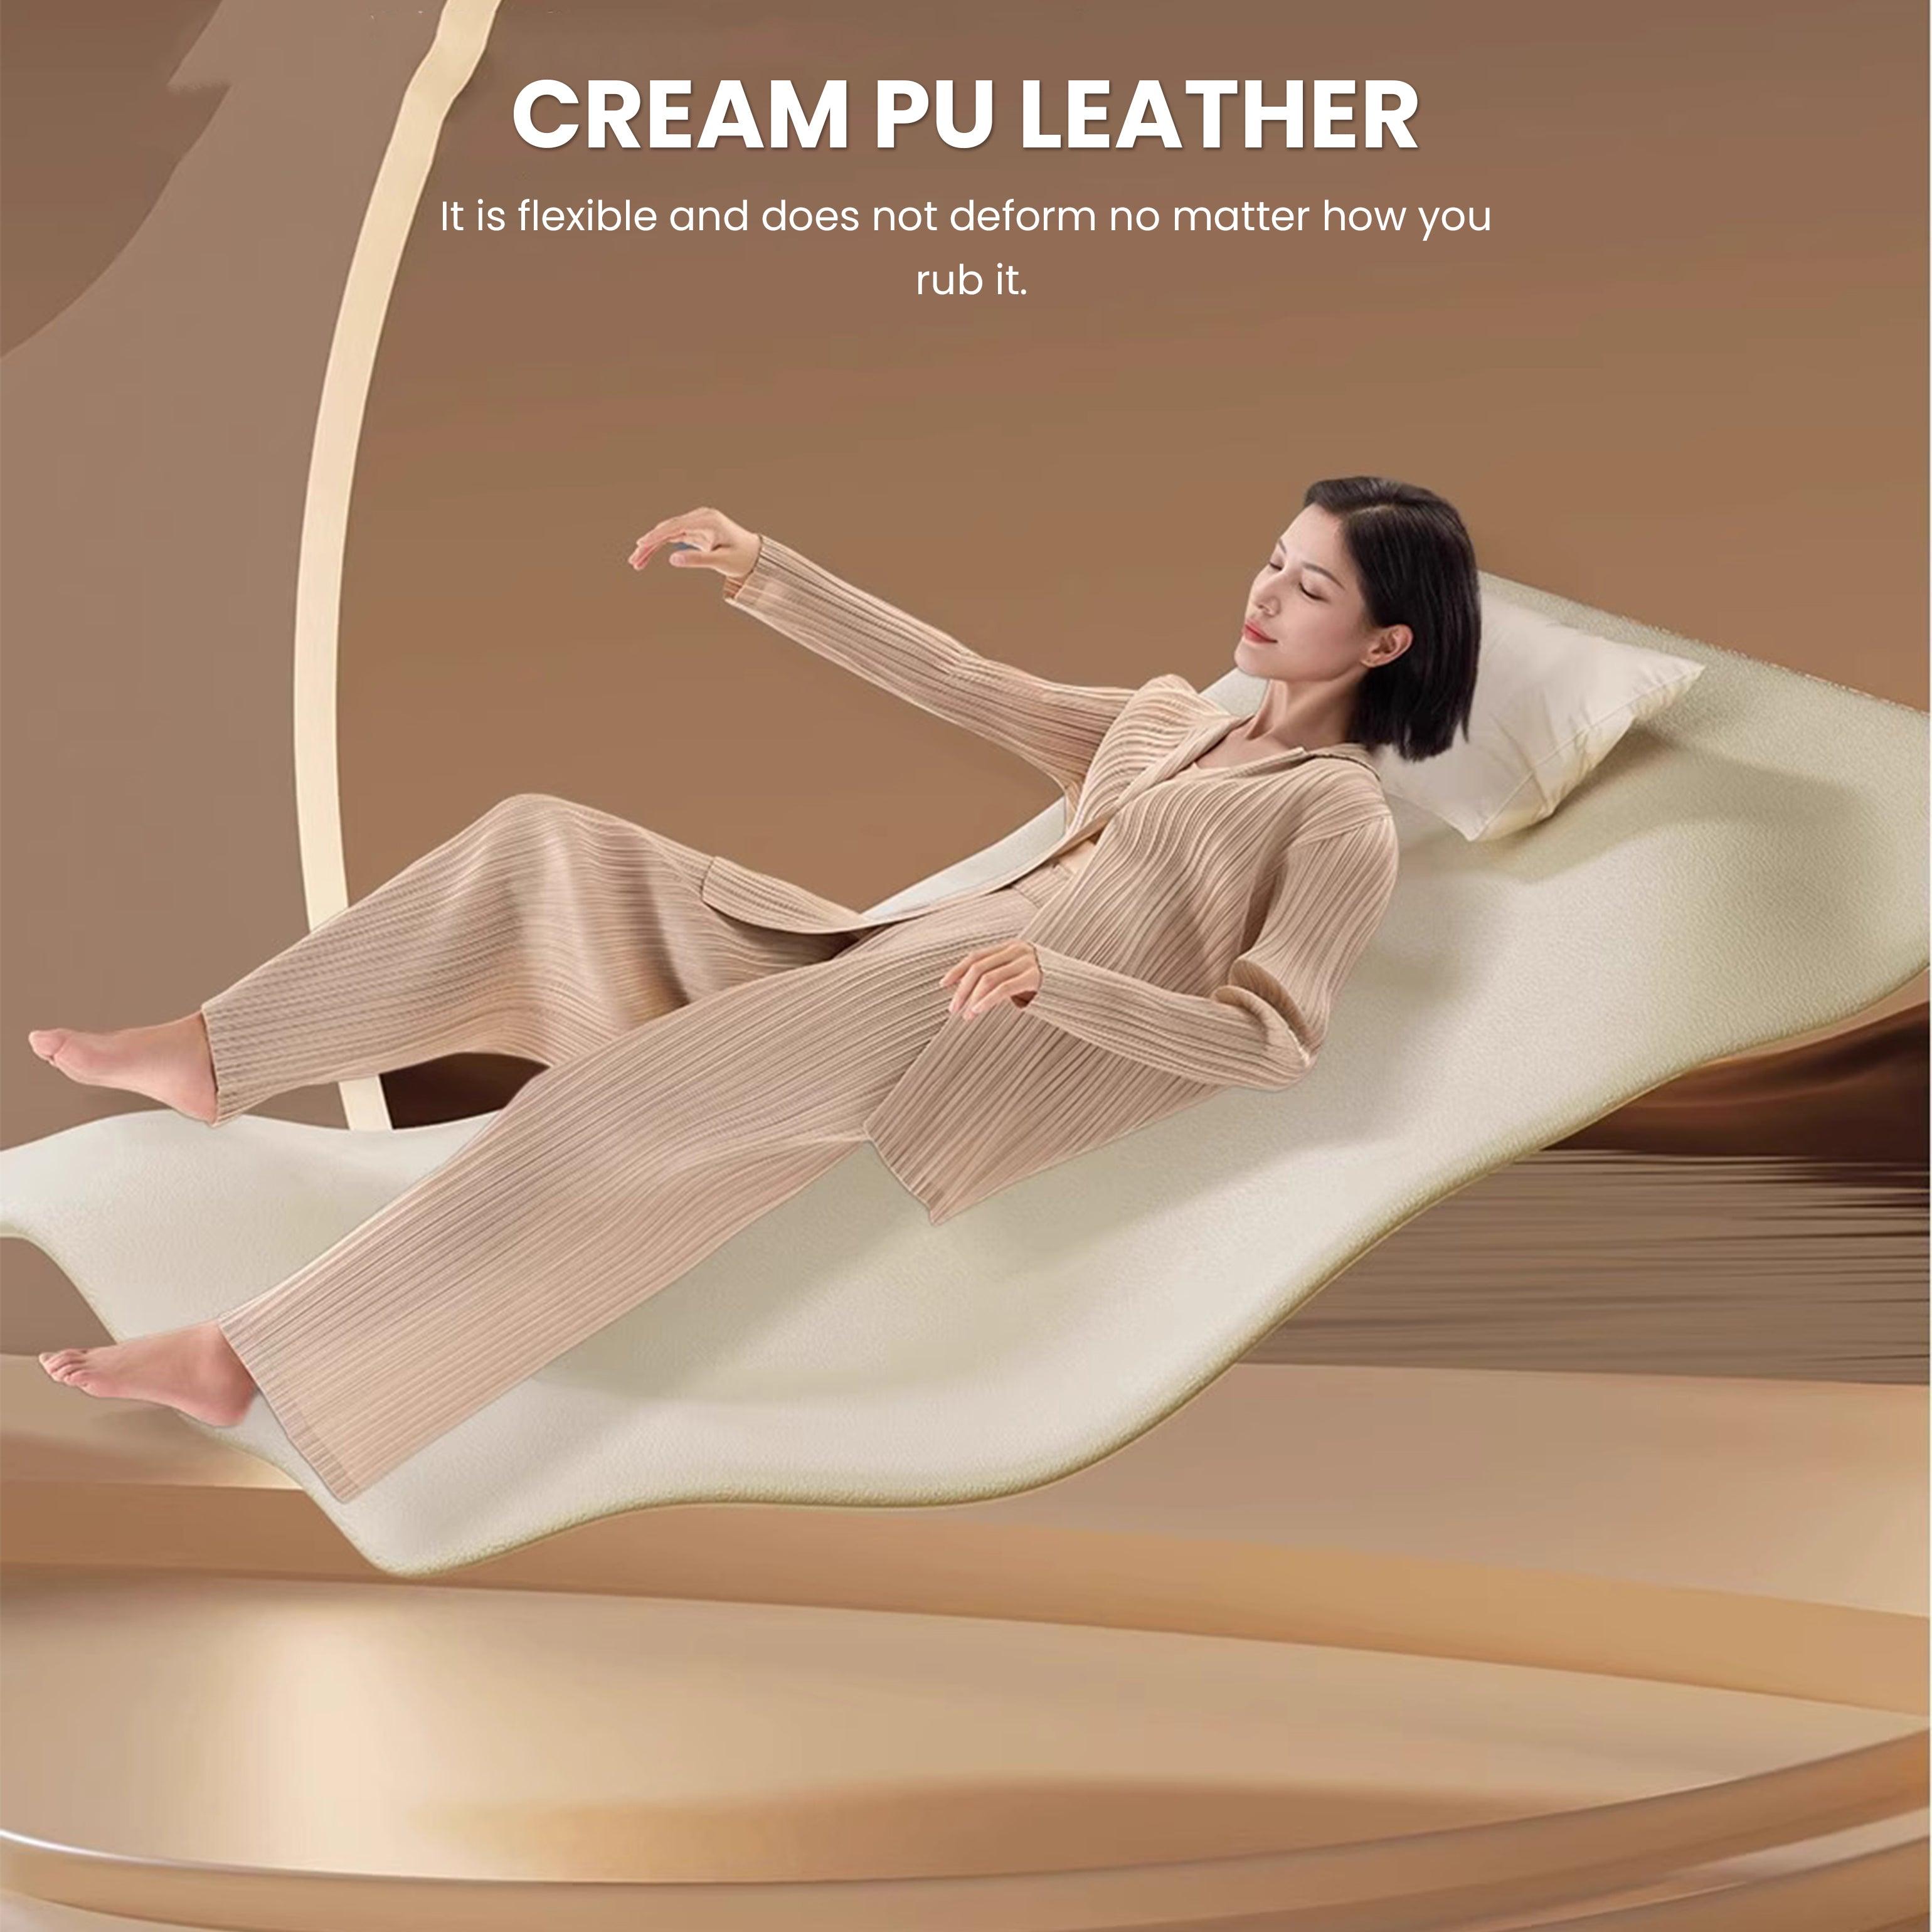 Woman relaxing on cream PU leather surface showing its flexibility and non-deforming quality